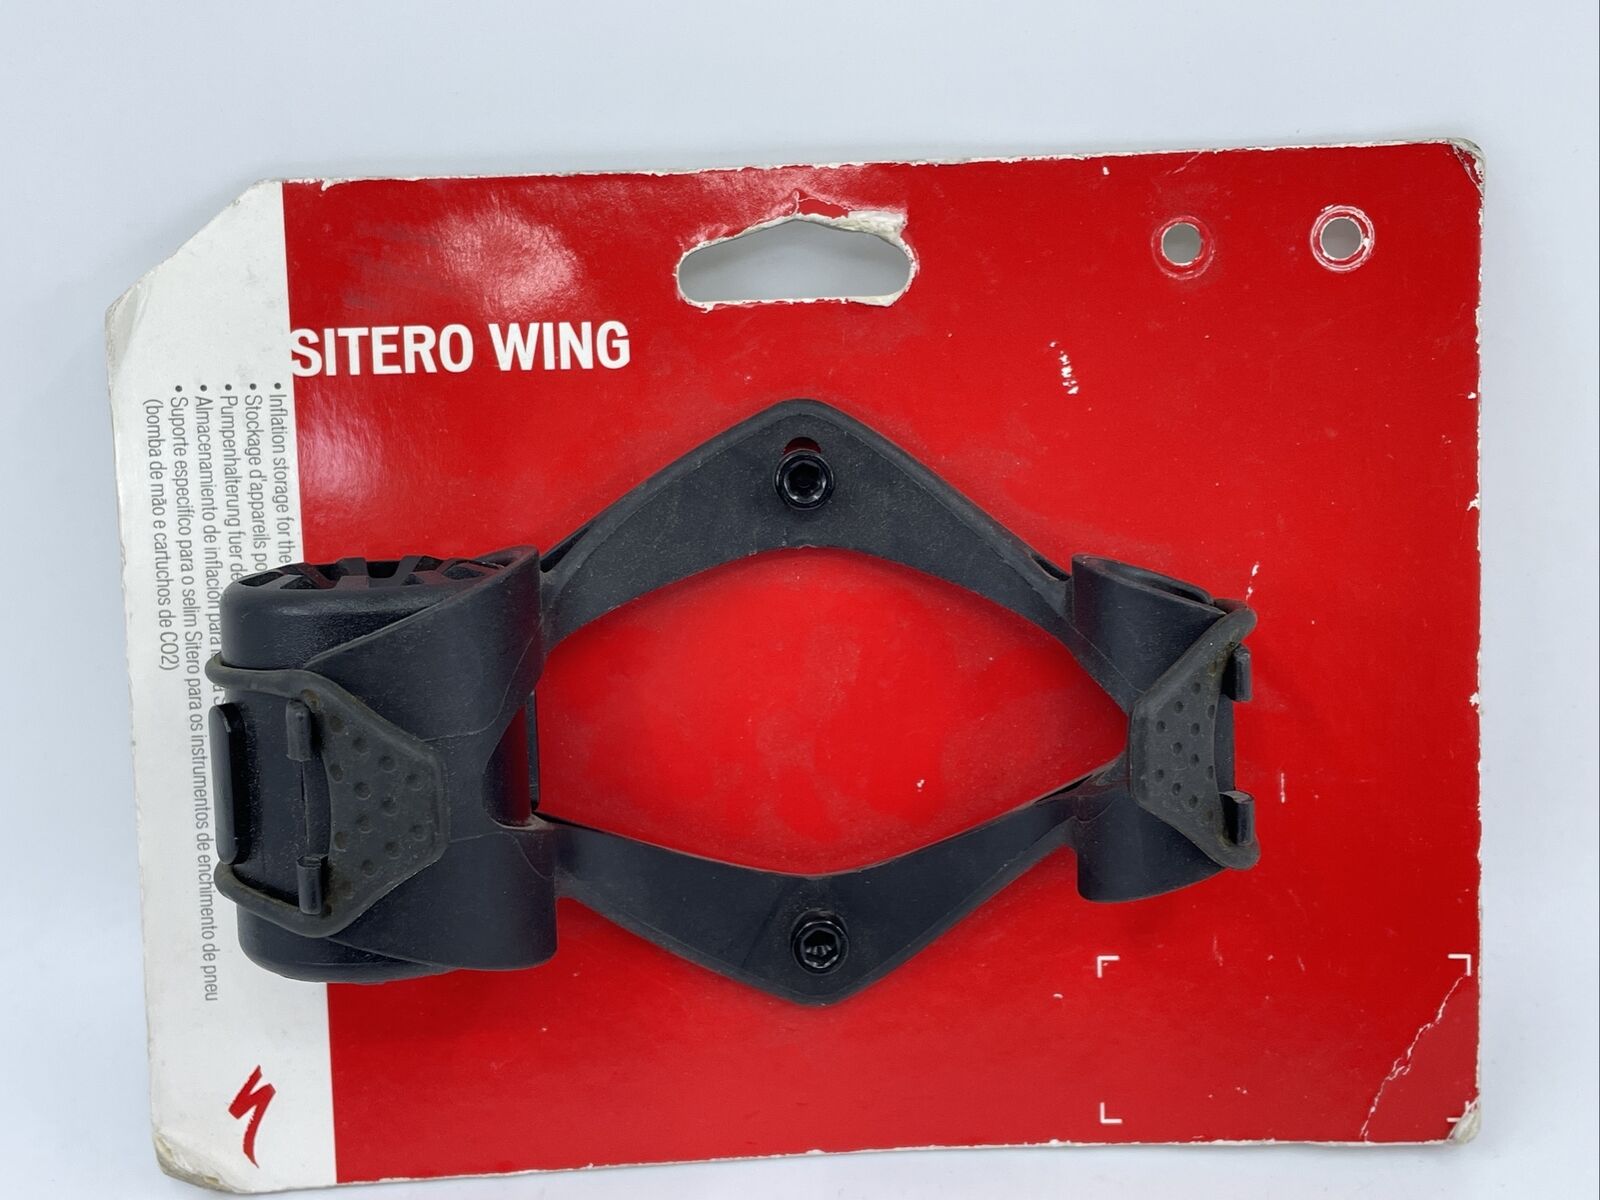 New Specialized Sitero Wing Accessory Mount Behind The Saddle Water Bottle Cage